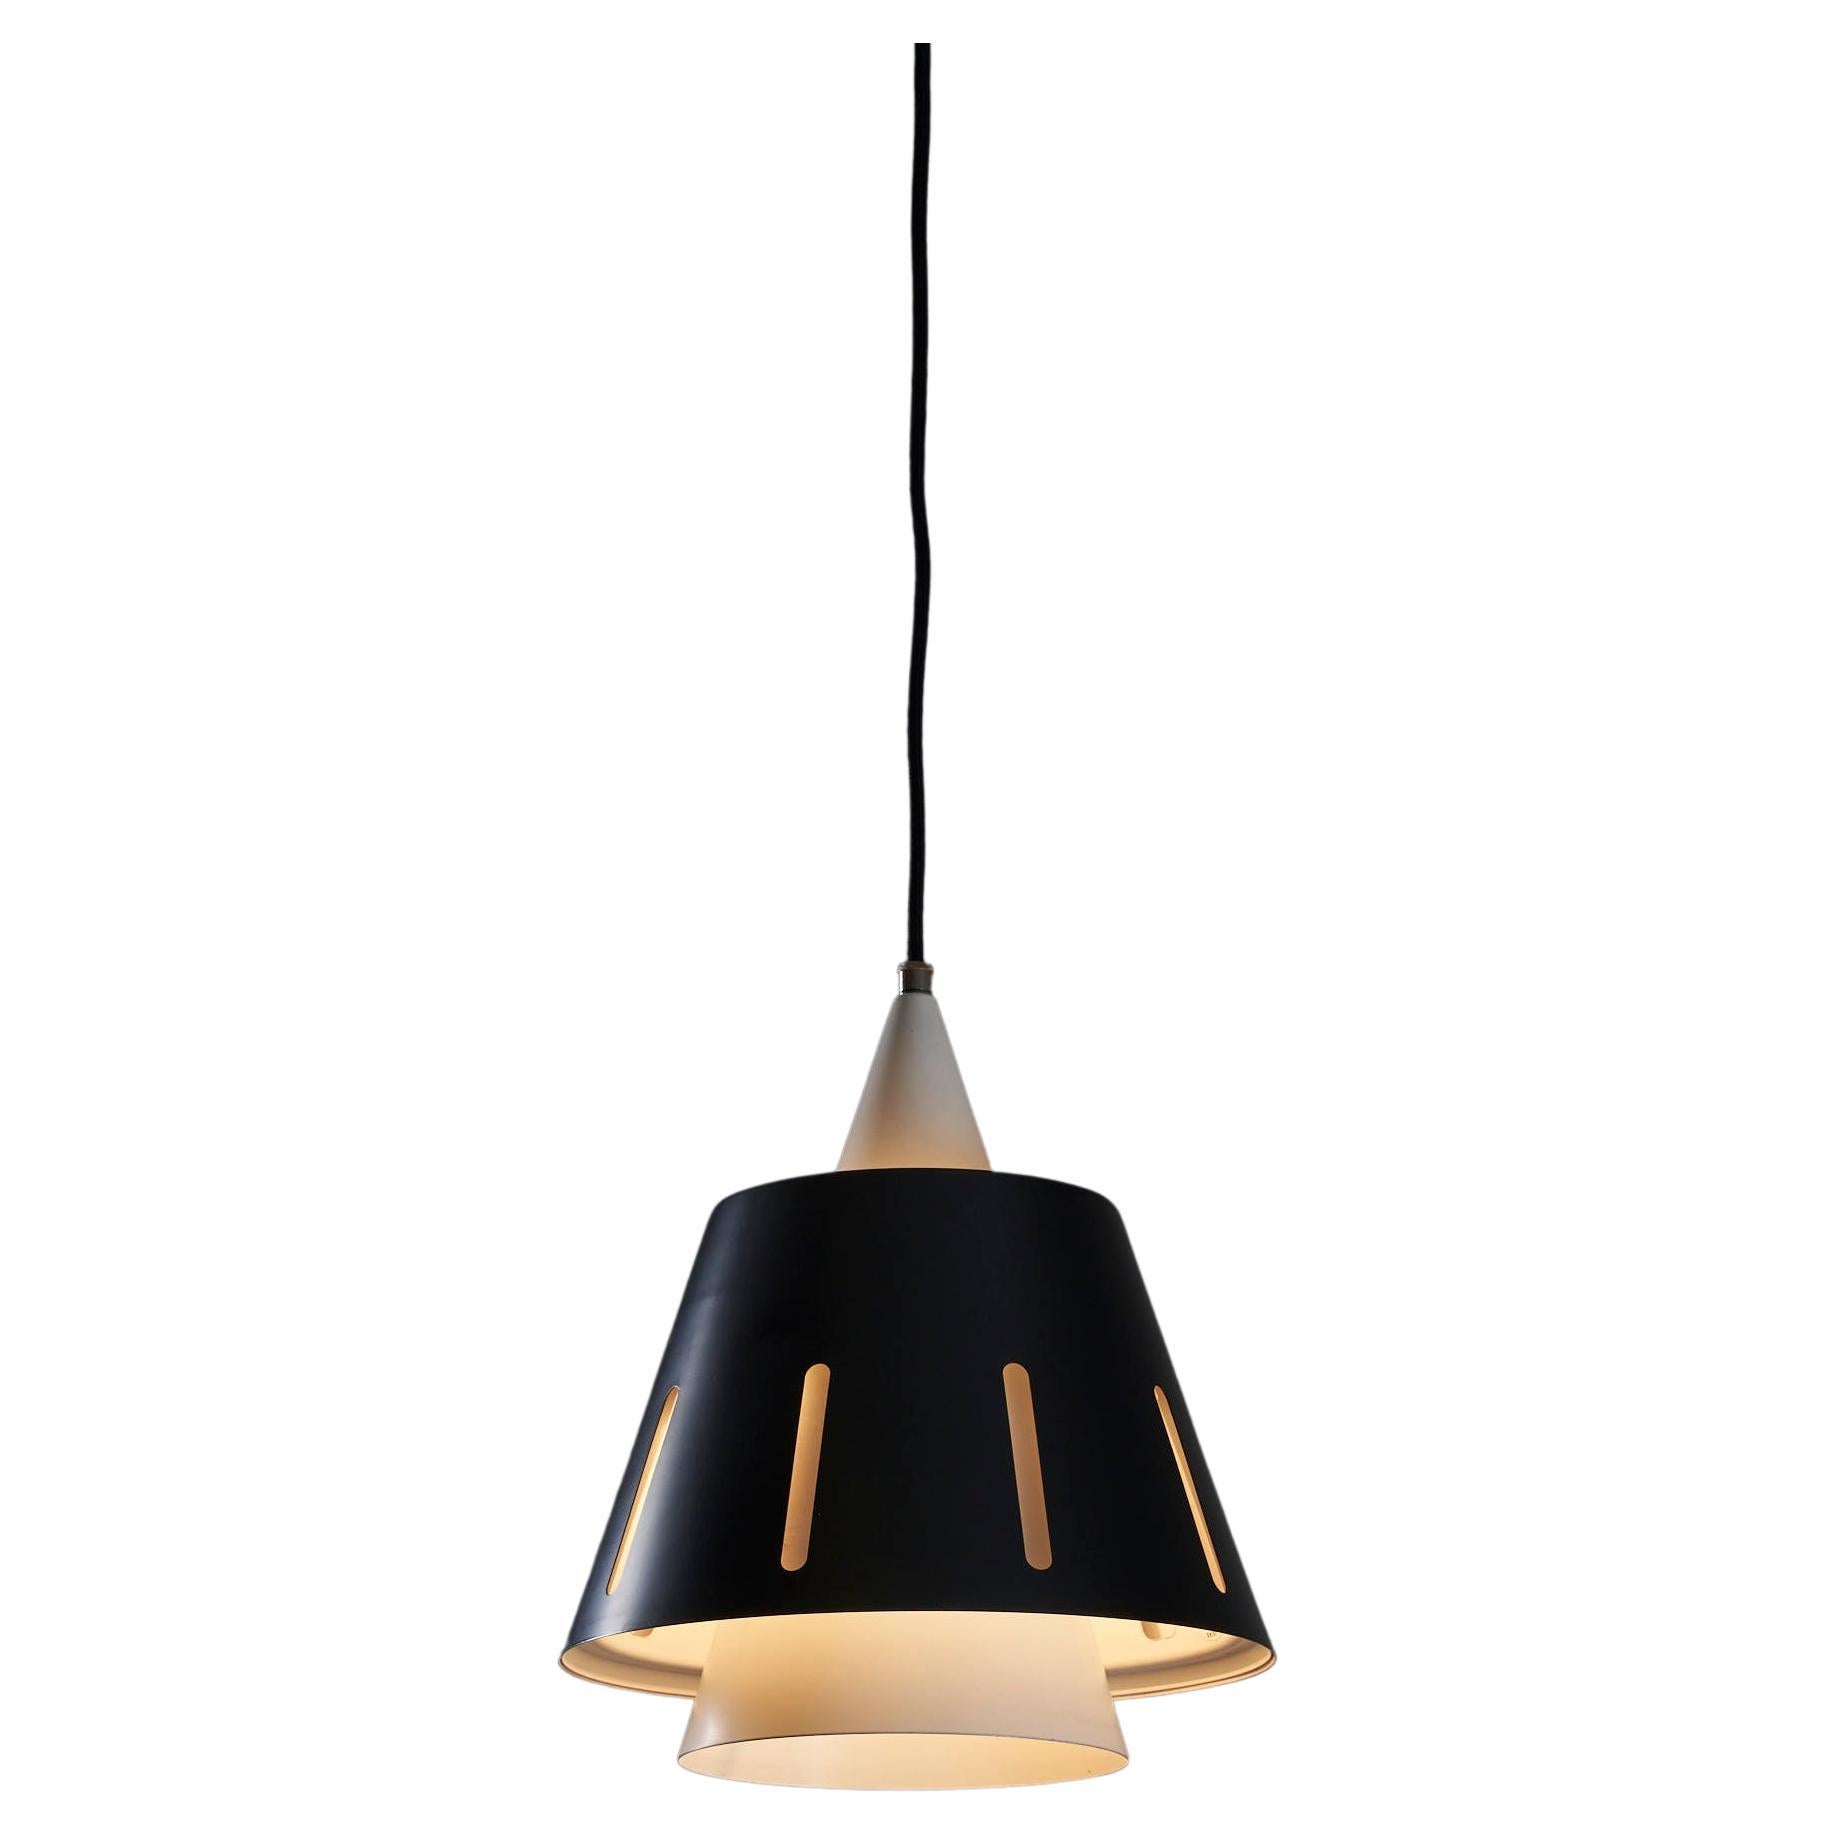 "n°10" Pendant By Busquet for Hala Zeist